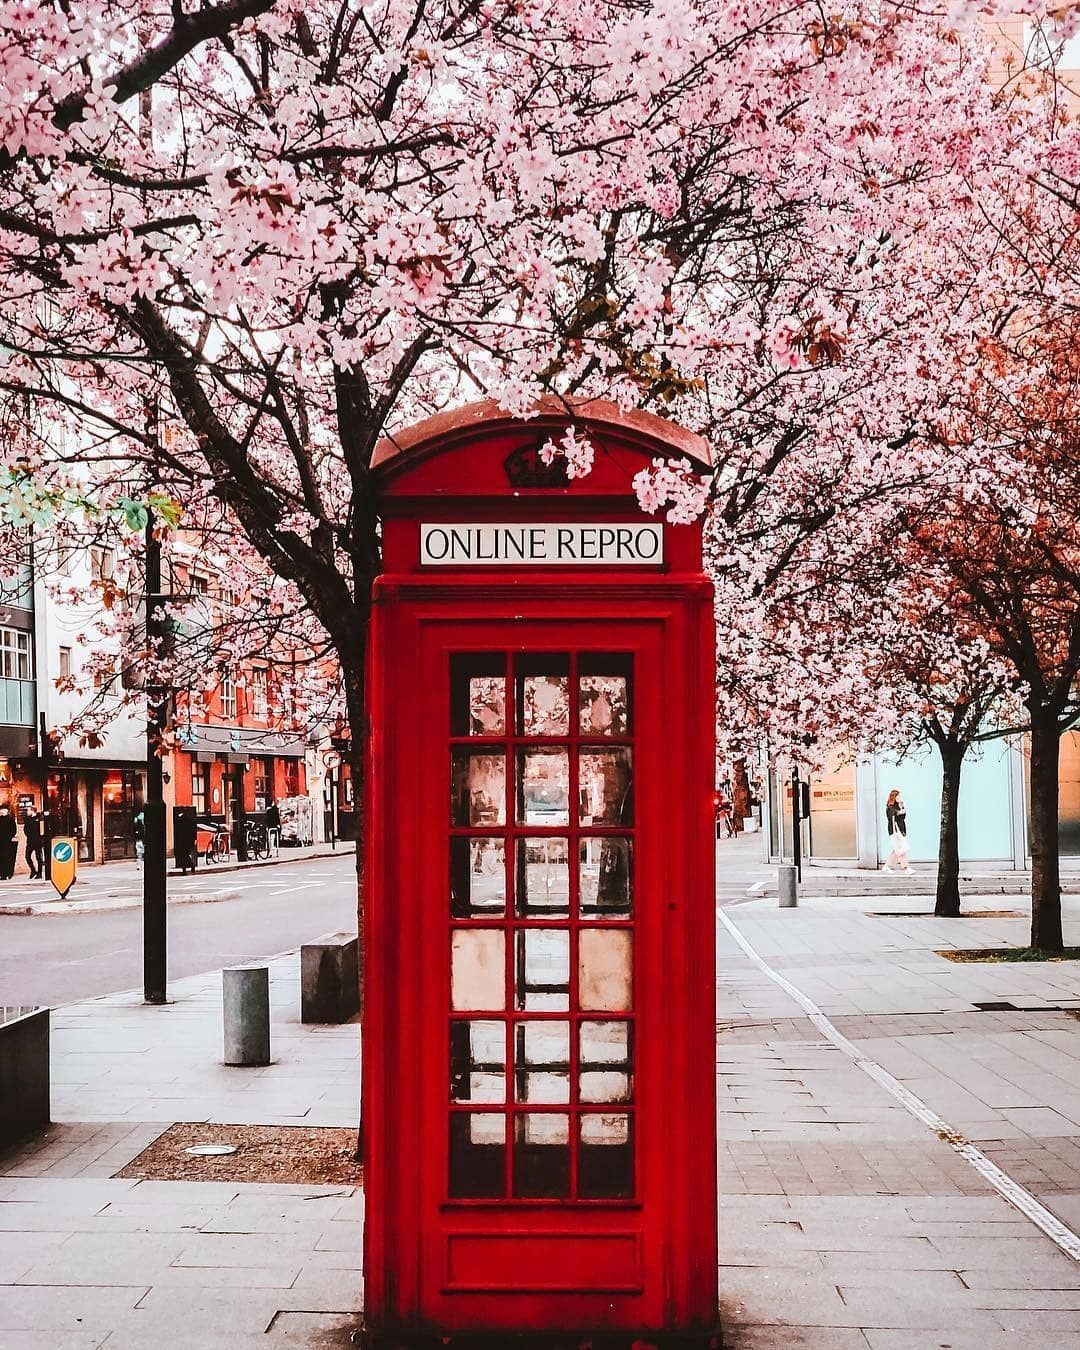 This is London on Instagram: “Spring in London is so beautiful ❤️